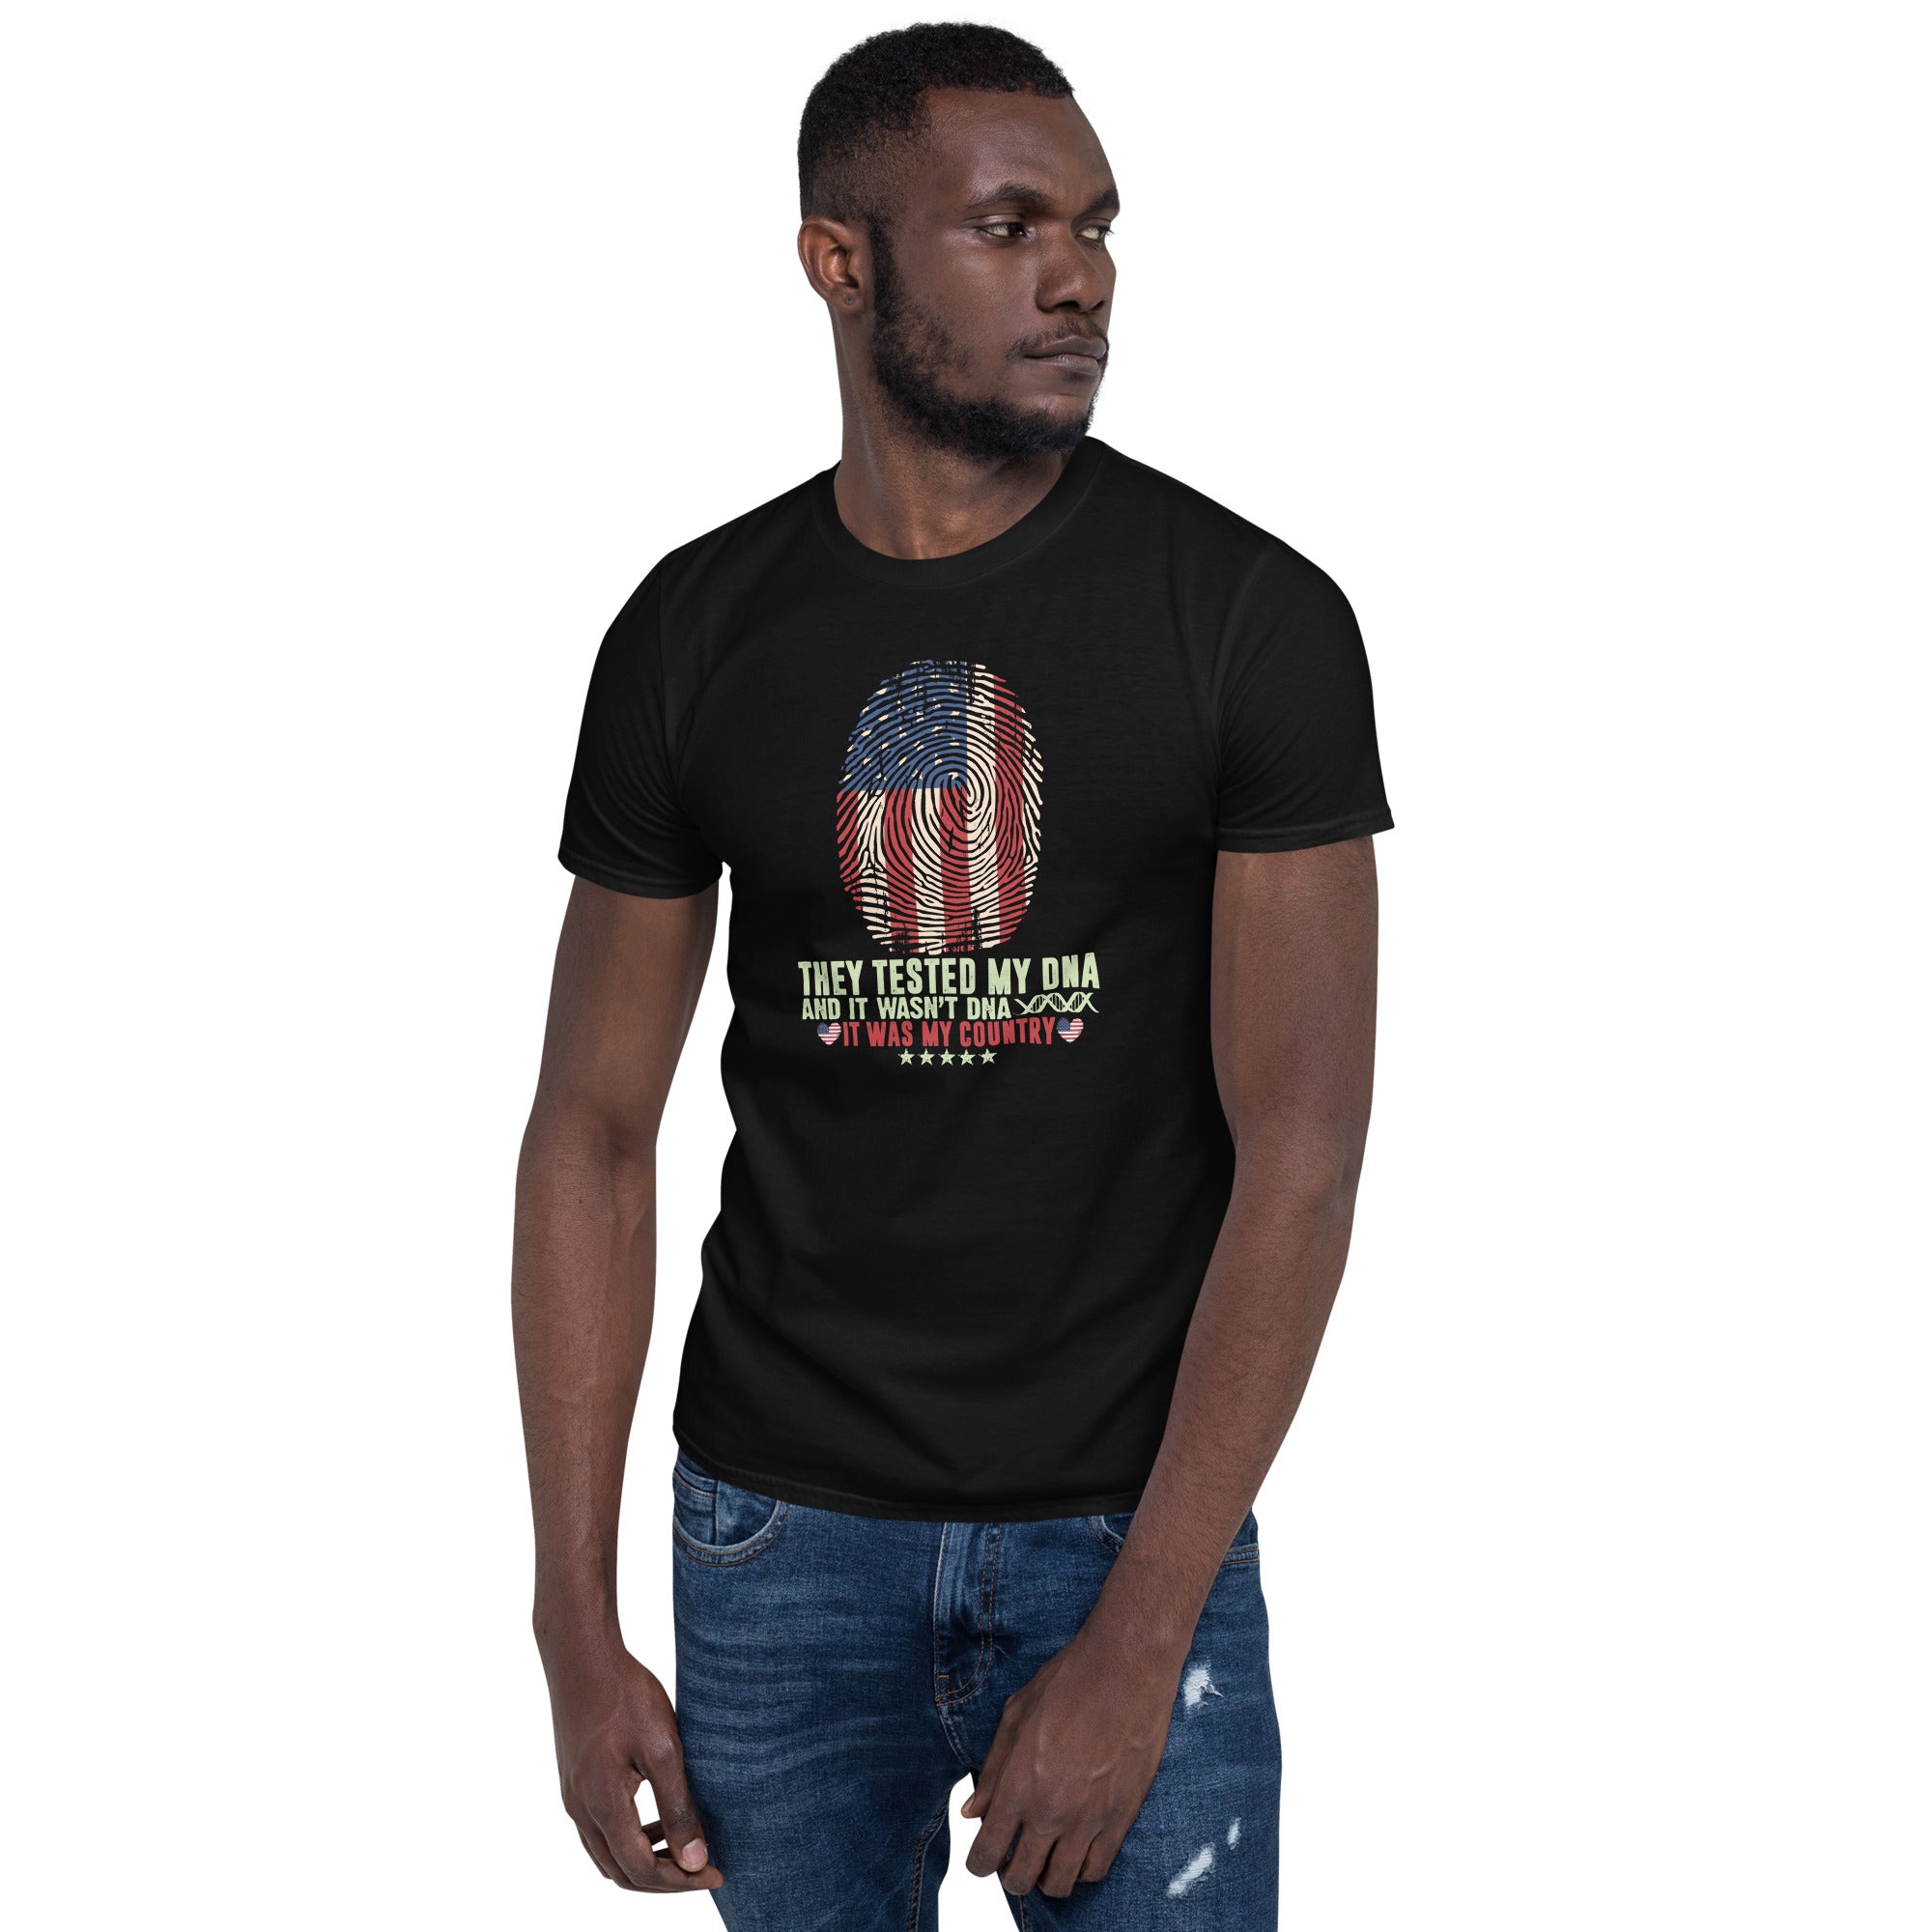 They Tested My DNA - Short-Sleeve Unisex T-Shirt